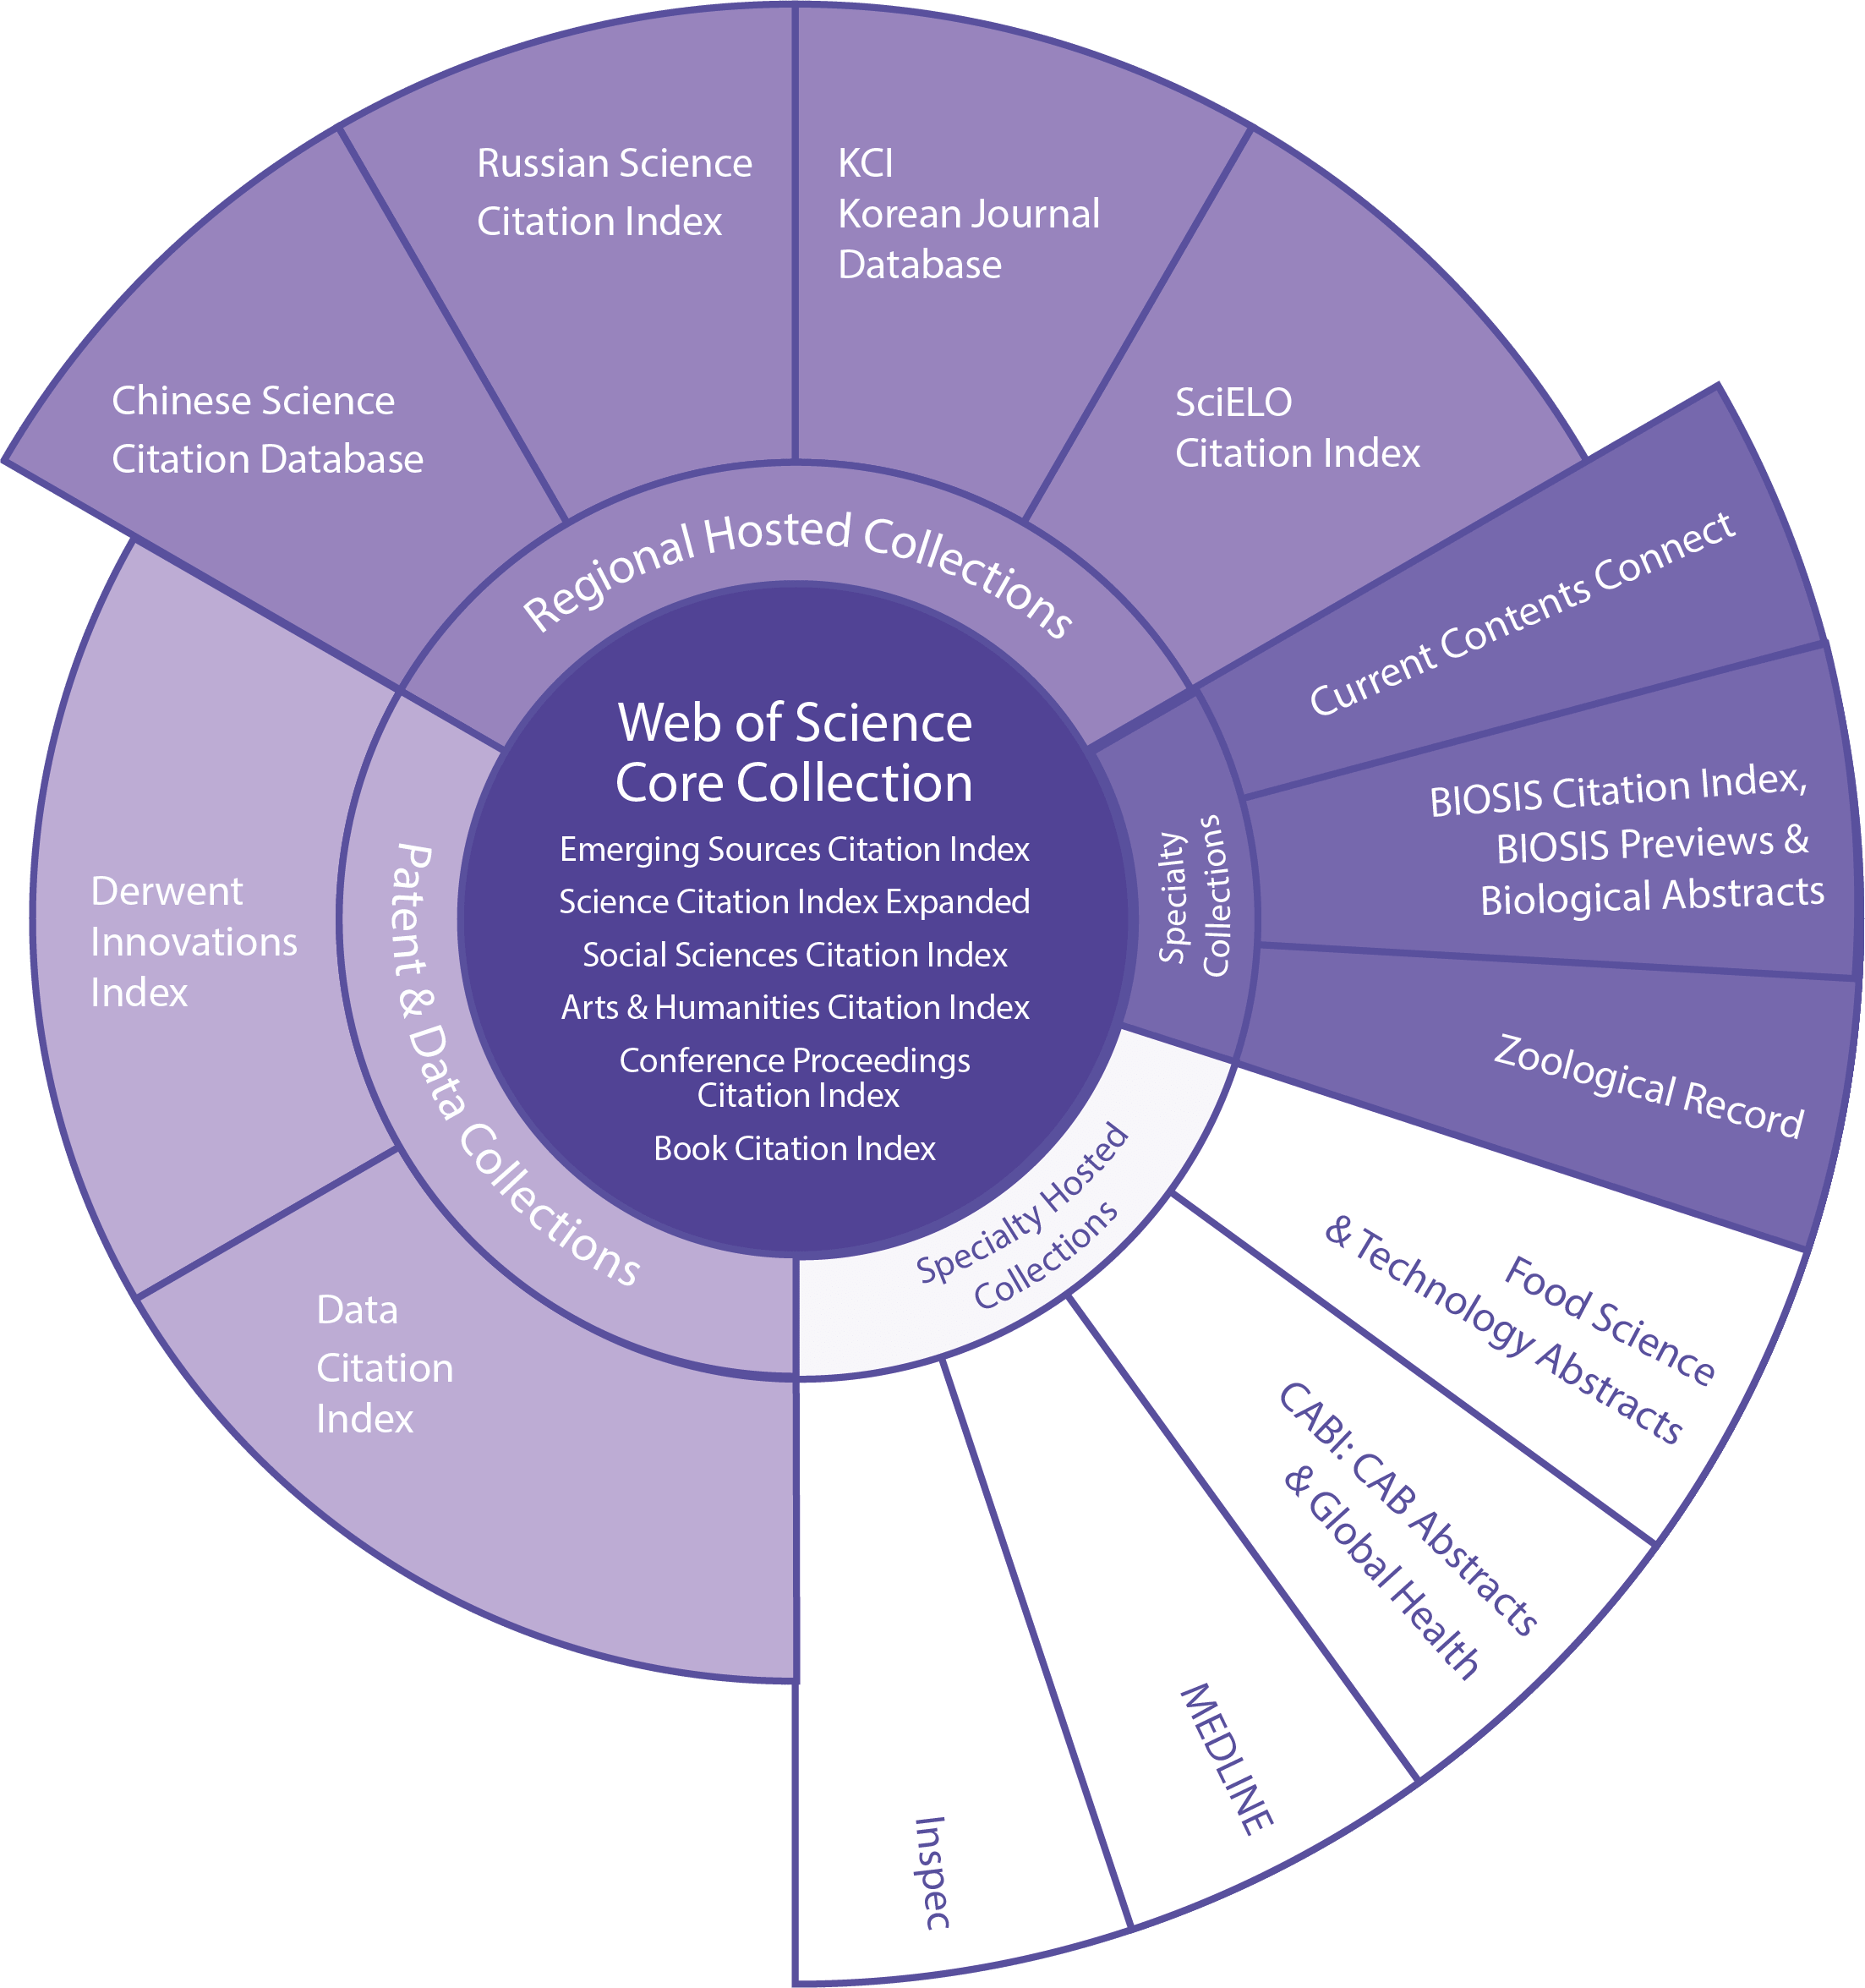 Graphic about the structure of Web of Science services